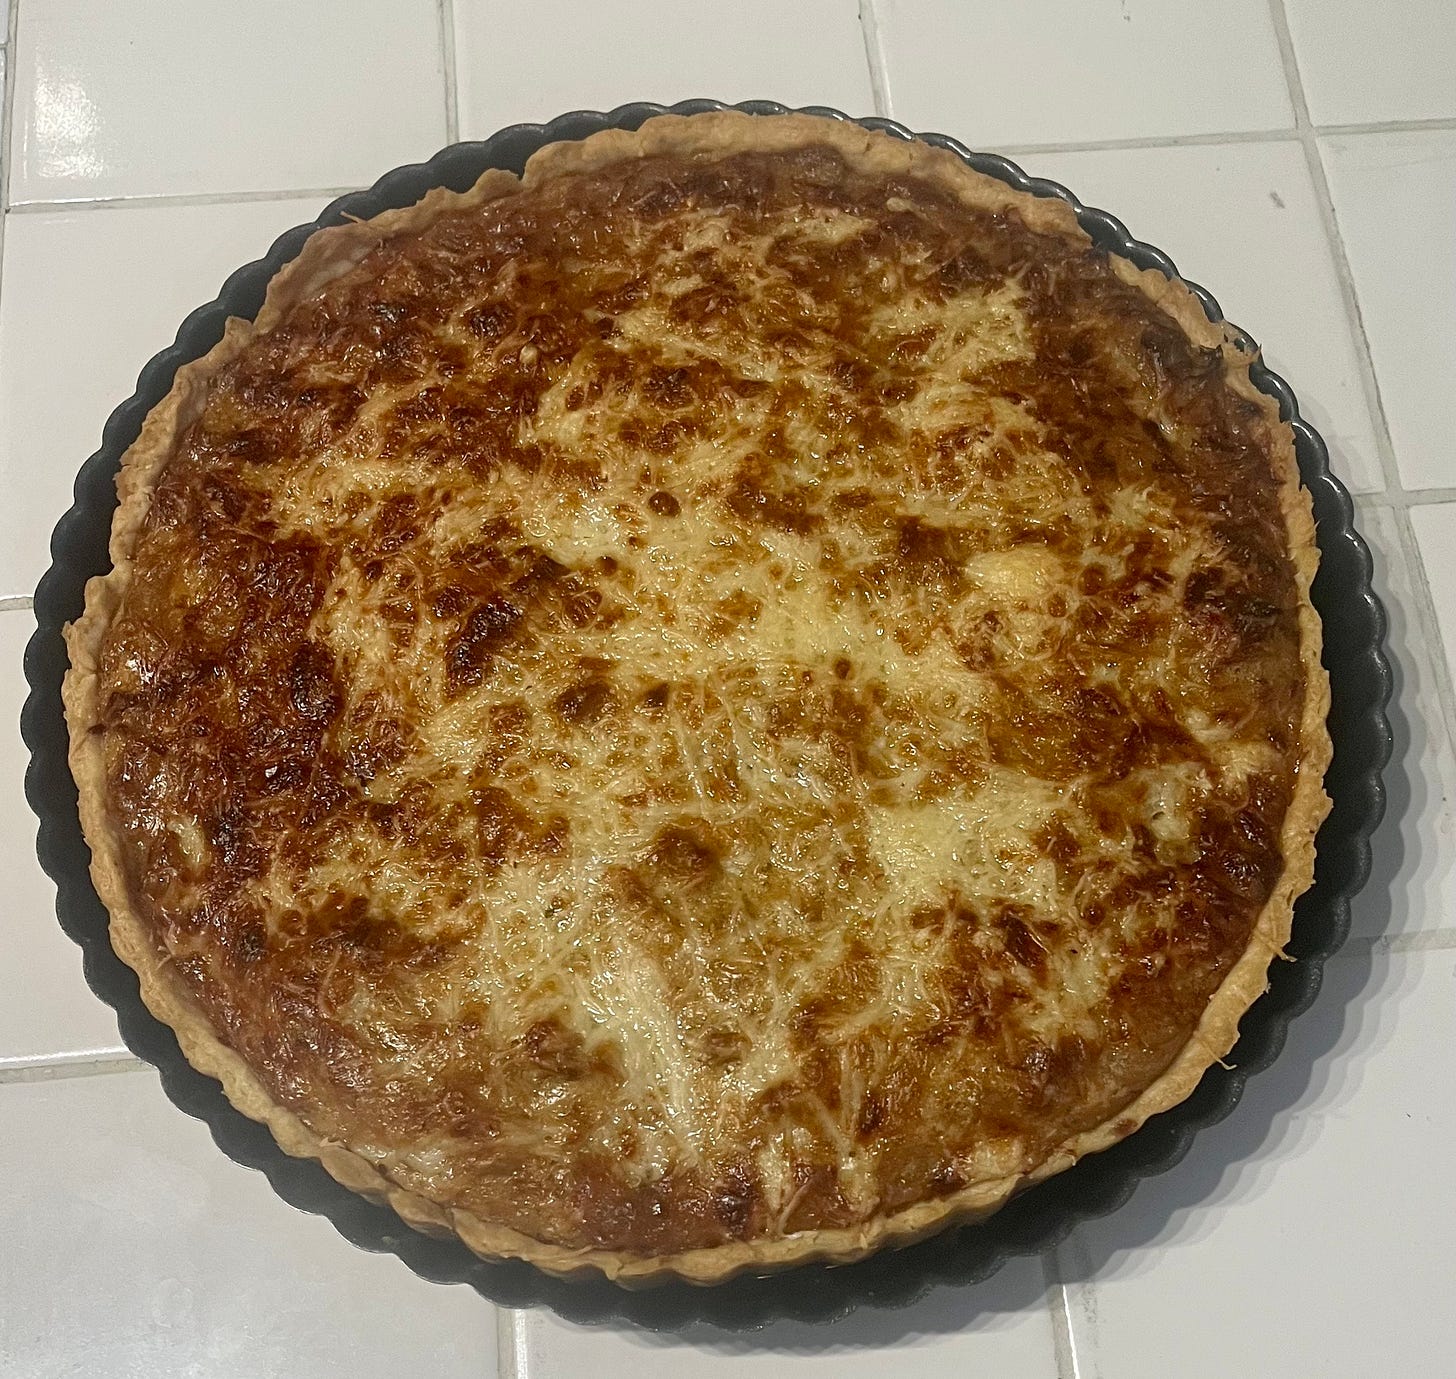 A bubbly, baked onion and gruyere tart